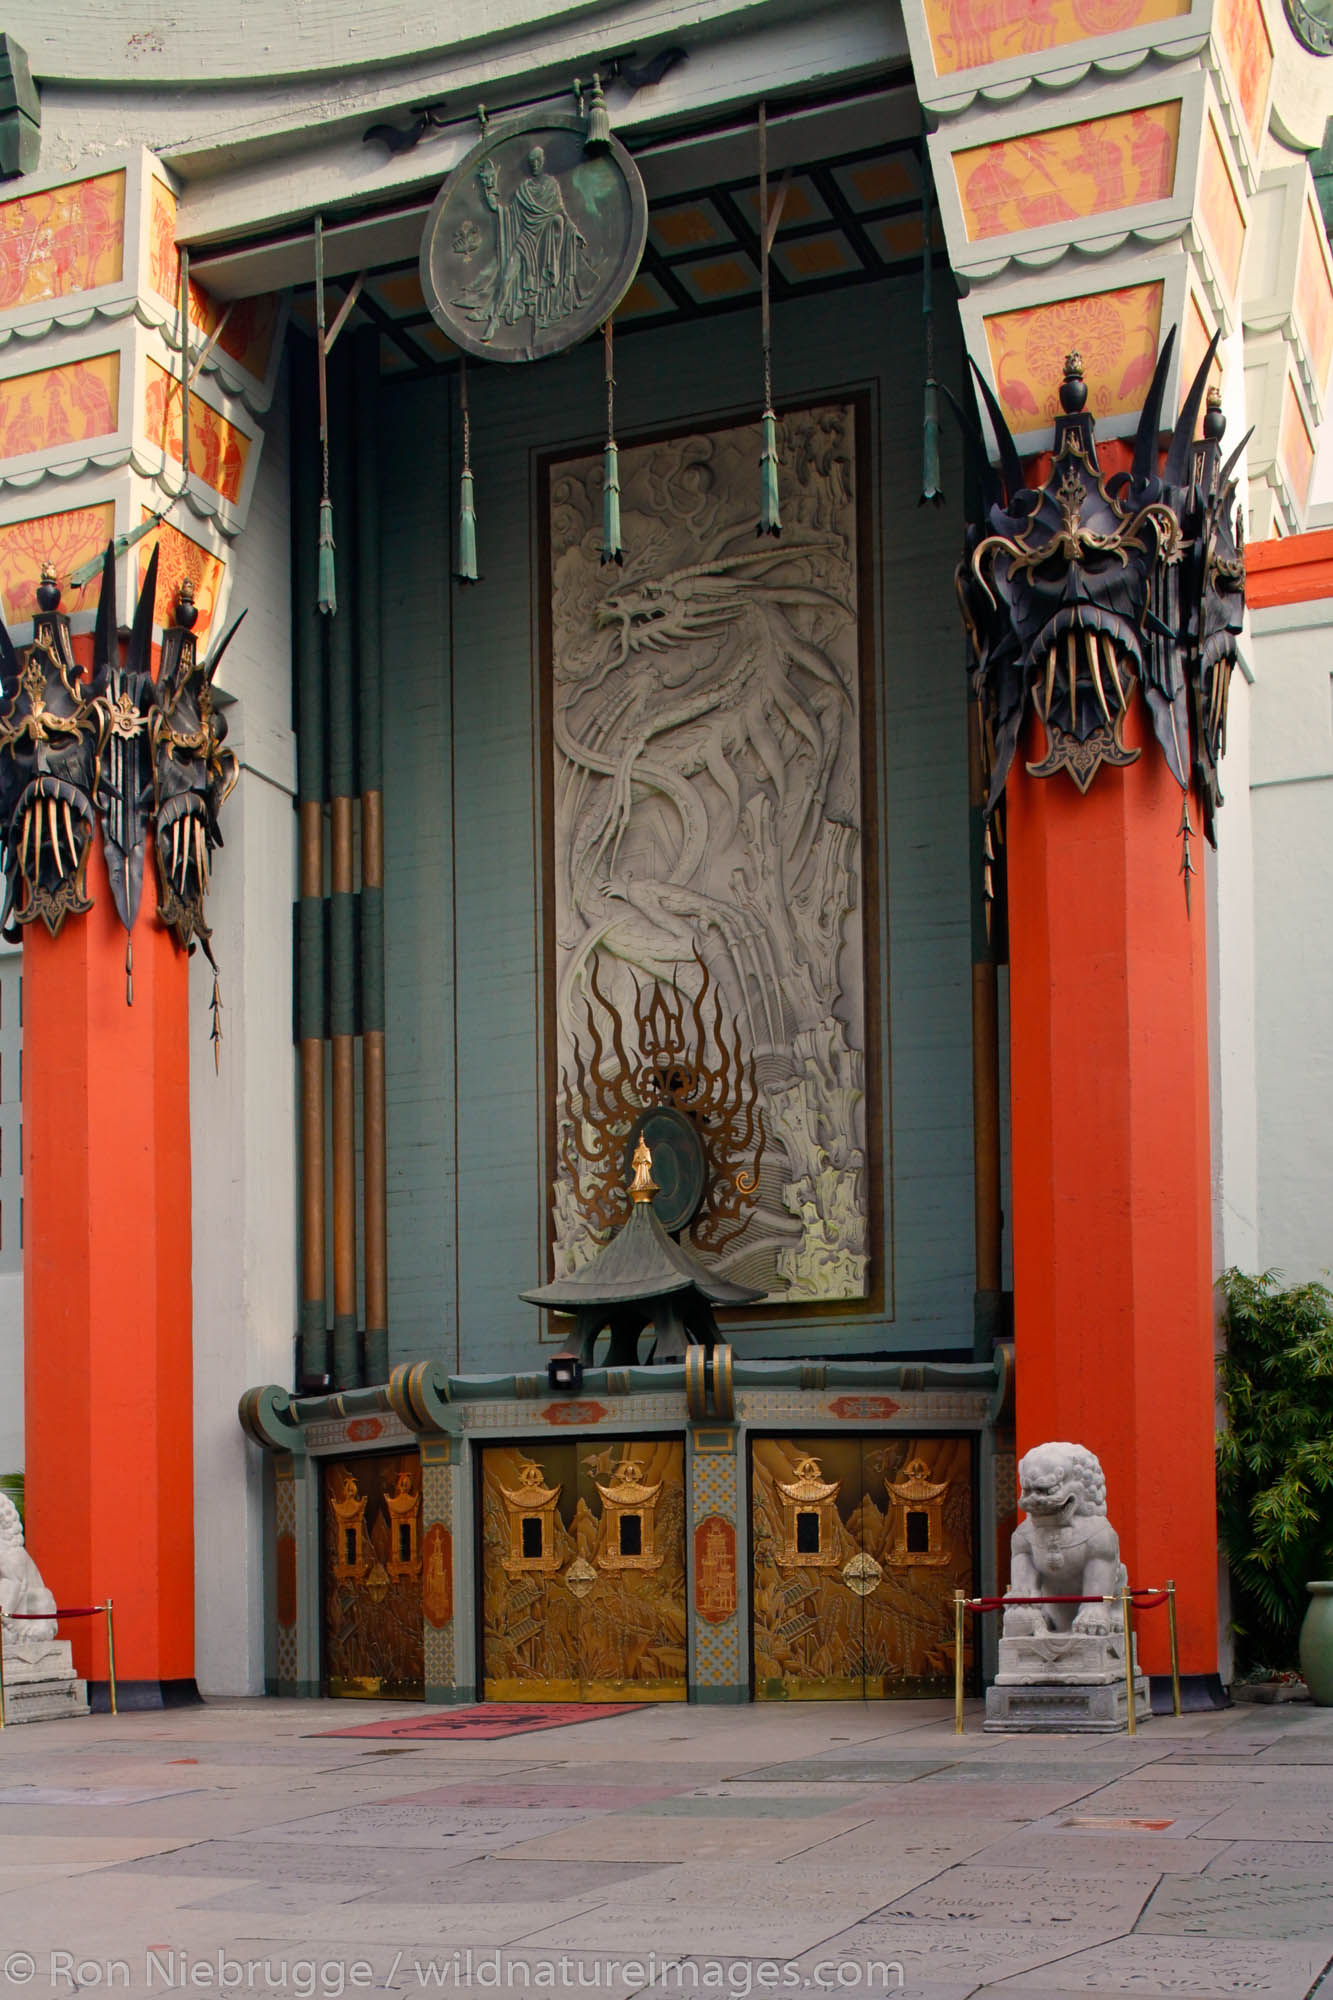 Grauman's Chinese Theater on Hollywood Boulevard, Hollywood, Los Angeles, California.